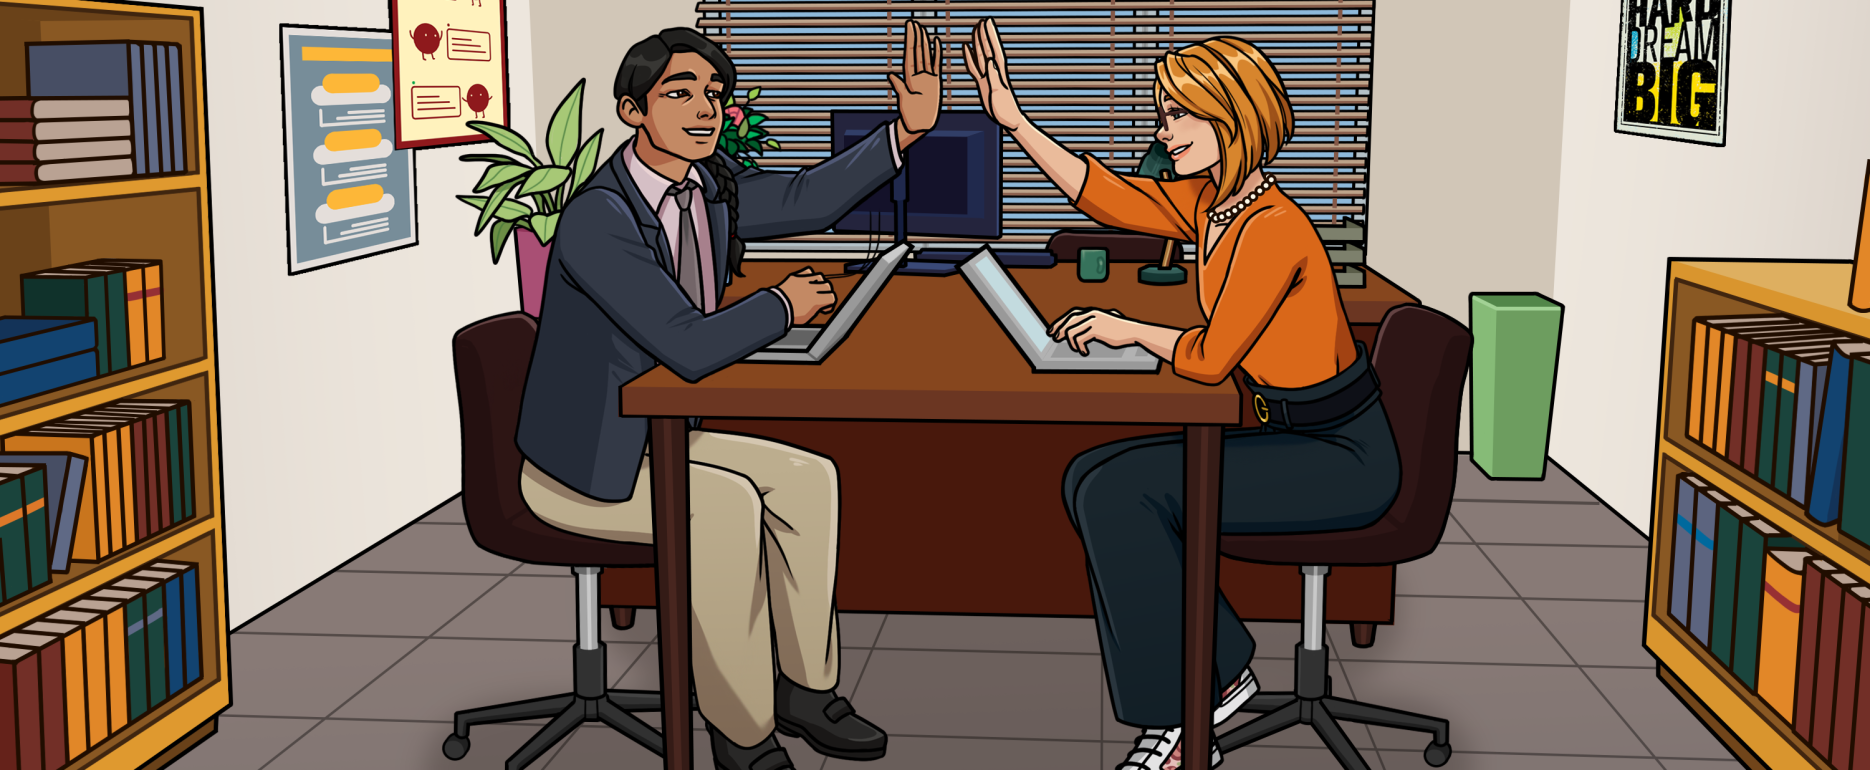 An illustration of two members of staff giving a high five.